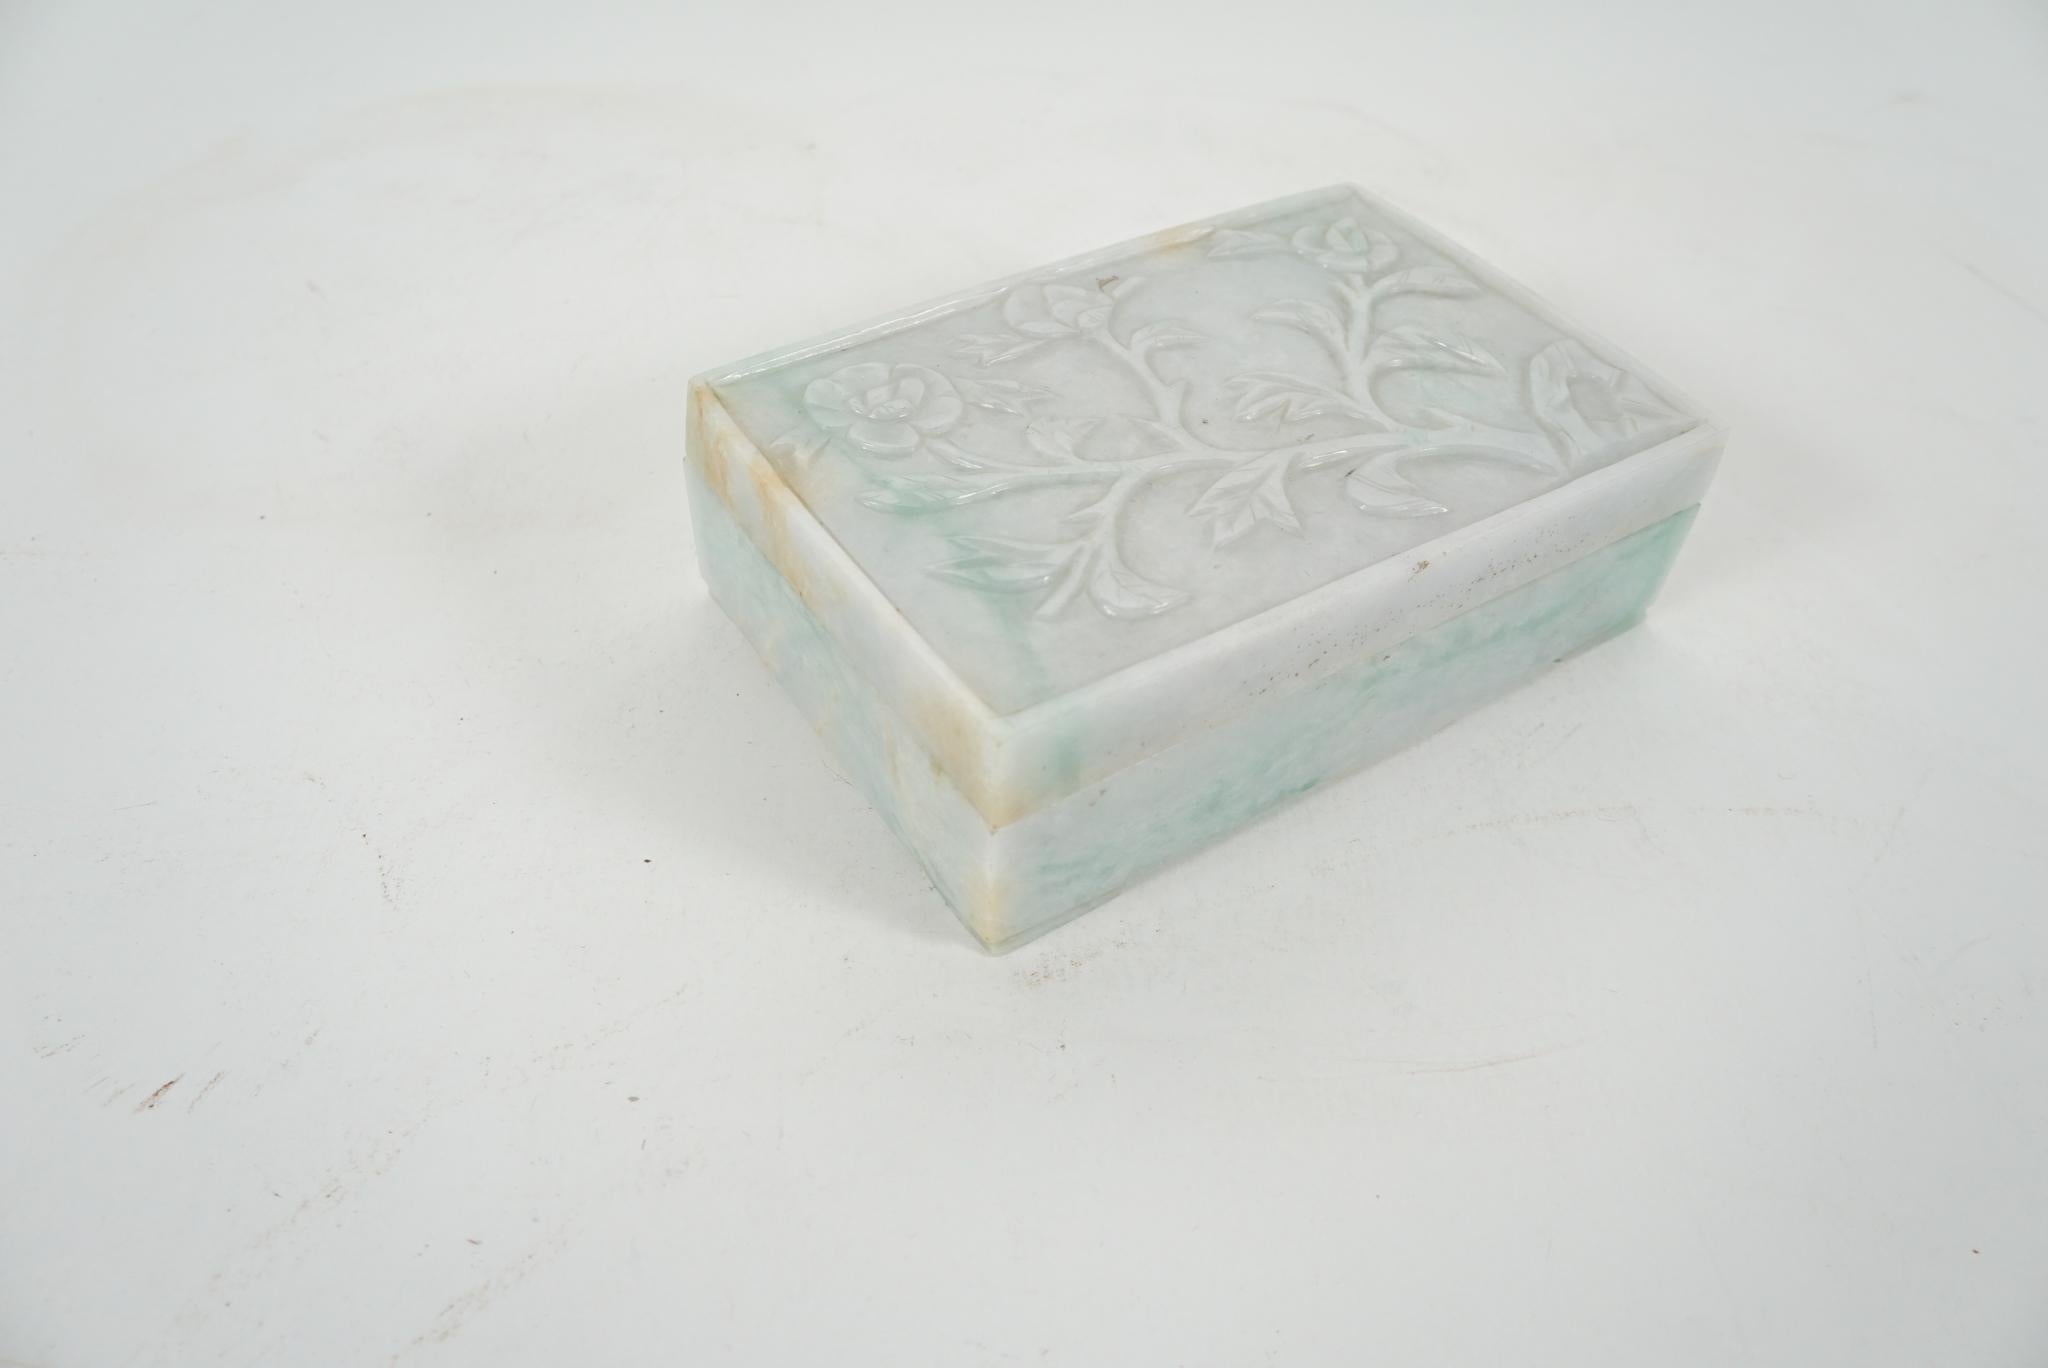 Made in the late Republic Period, circa 1945 to 1950, this box was purchased in China in 1990. The boxes carved jadeite ranges from a lovely soft translucent white to a rich green in veins that crisscross the stone with some natural brownish